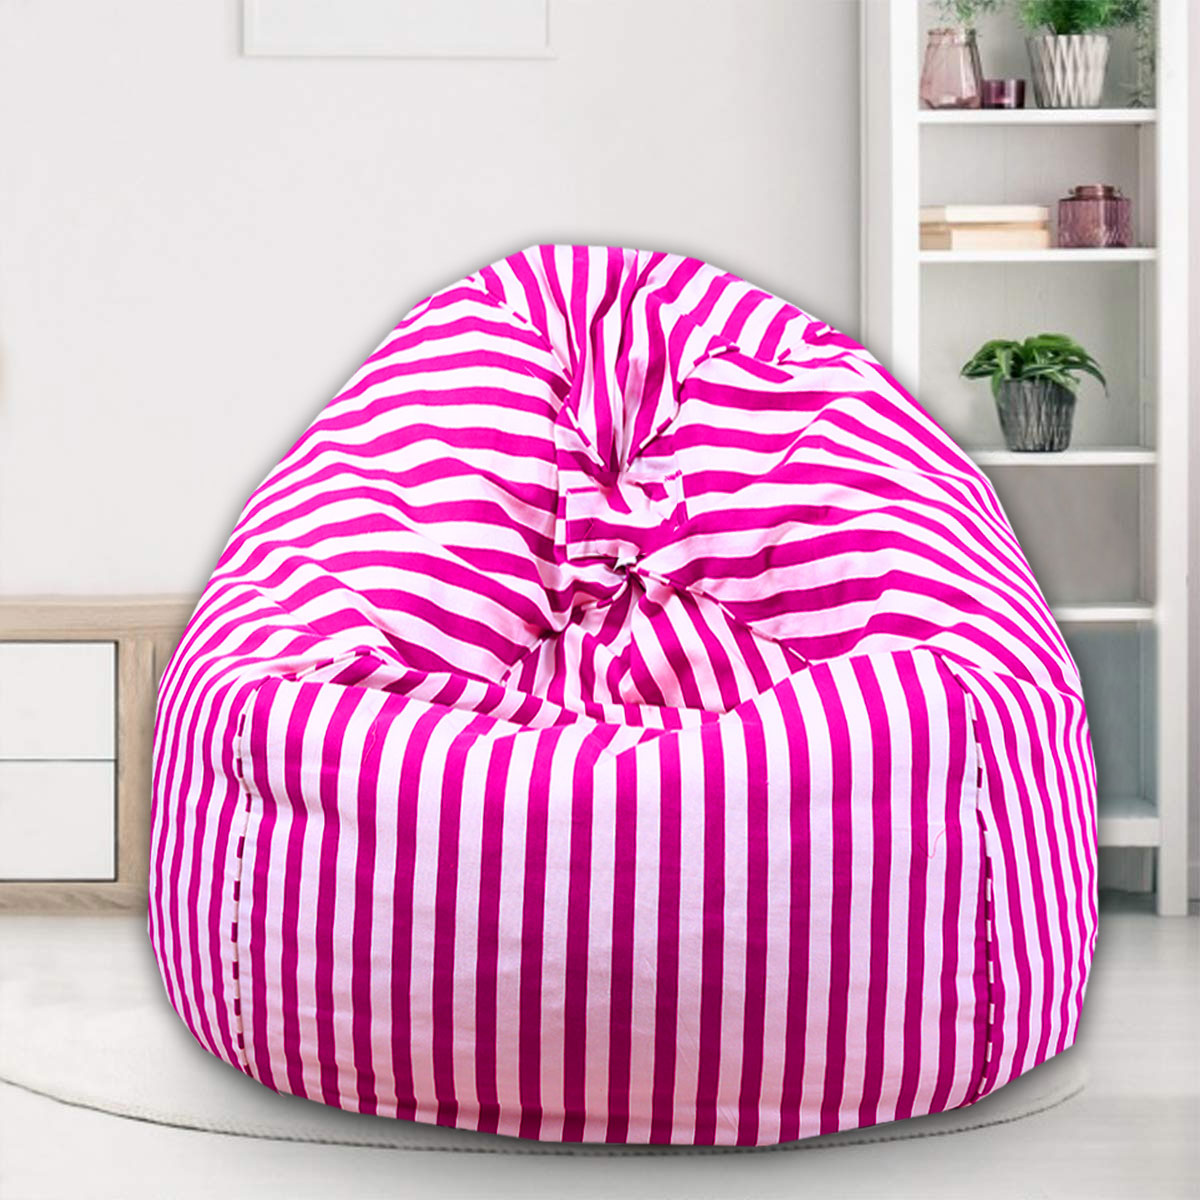 Solid Bean Bag Sofa With Foot Rest in fabric - Urban den